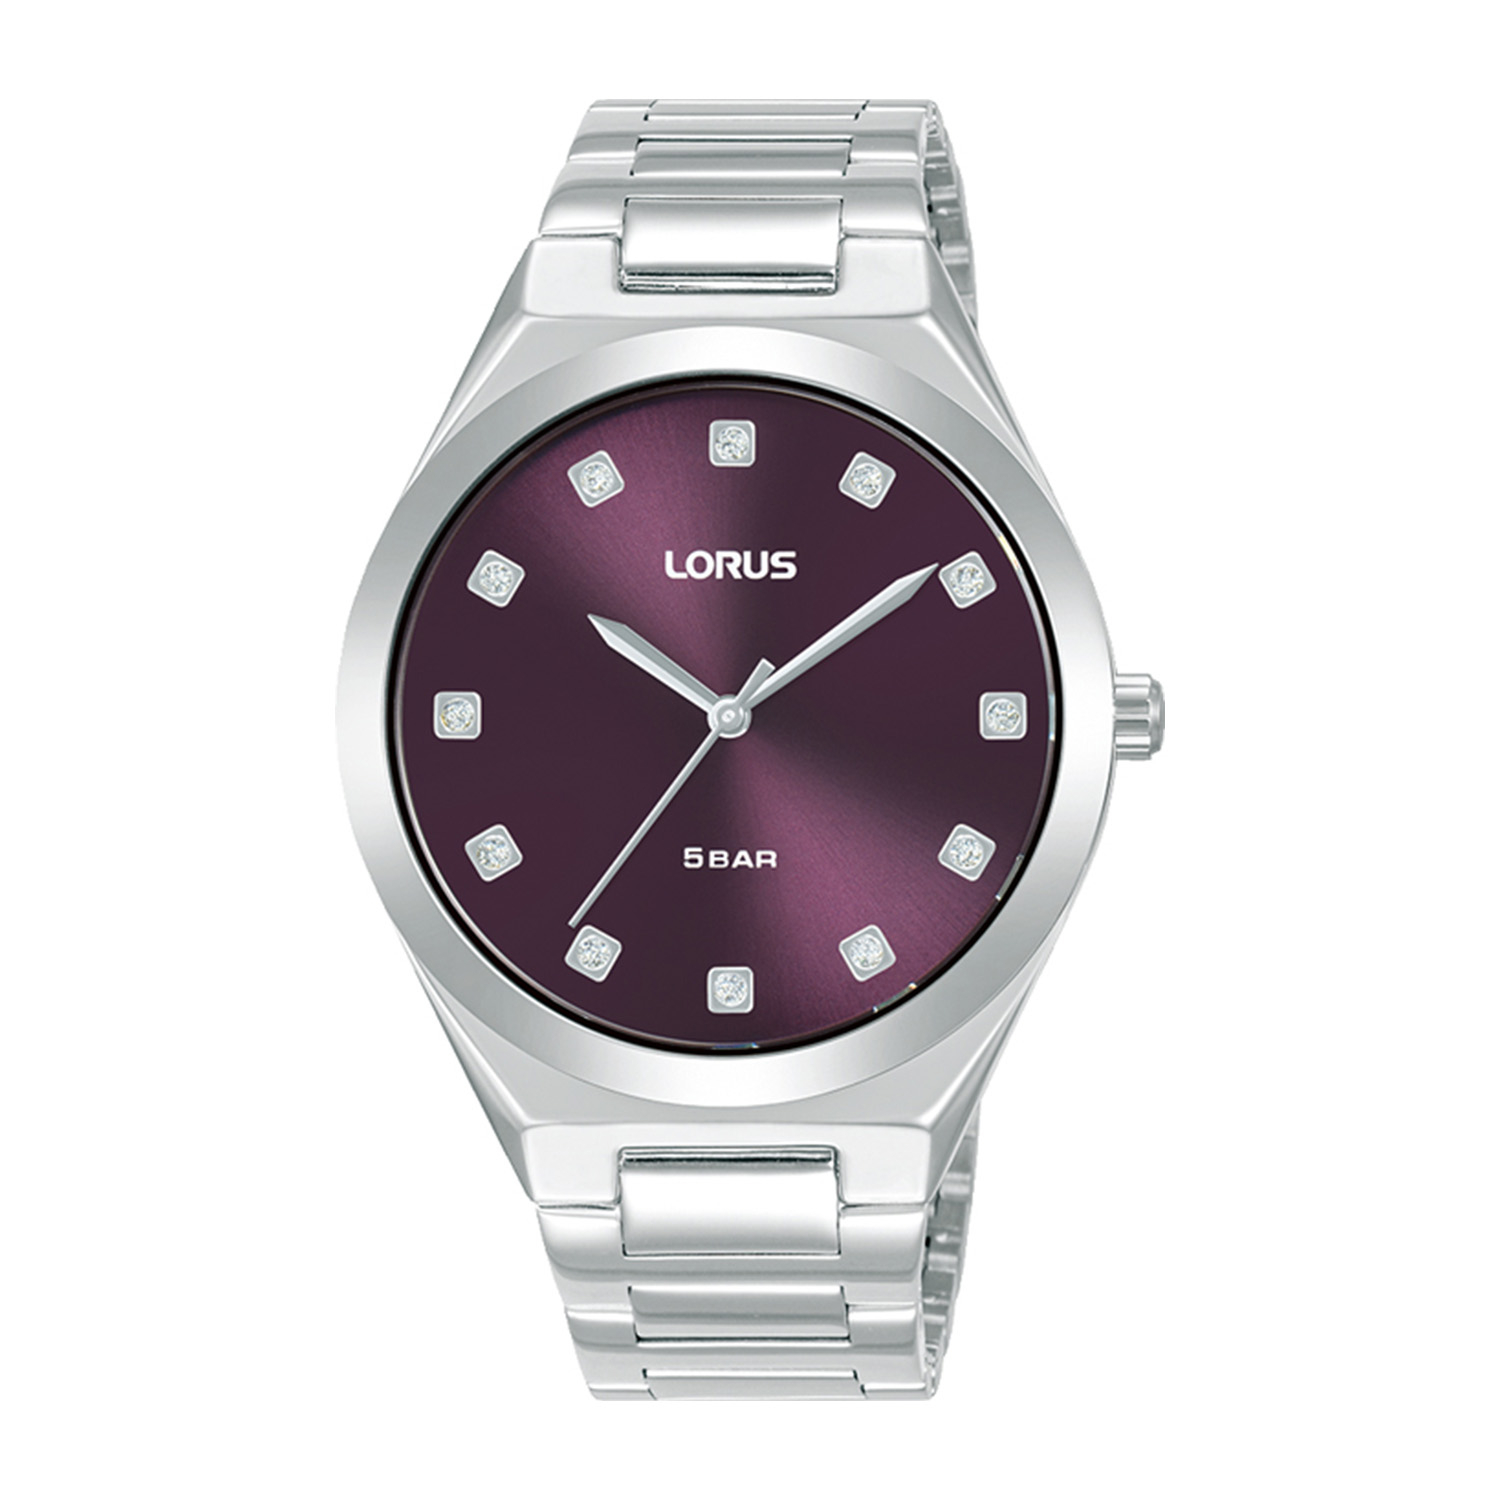 Womens watch LORUS made of silver stainless steel with purple dial and bracelet.